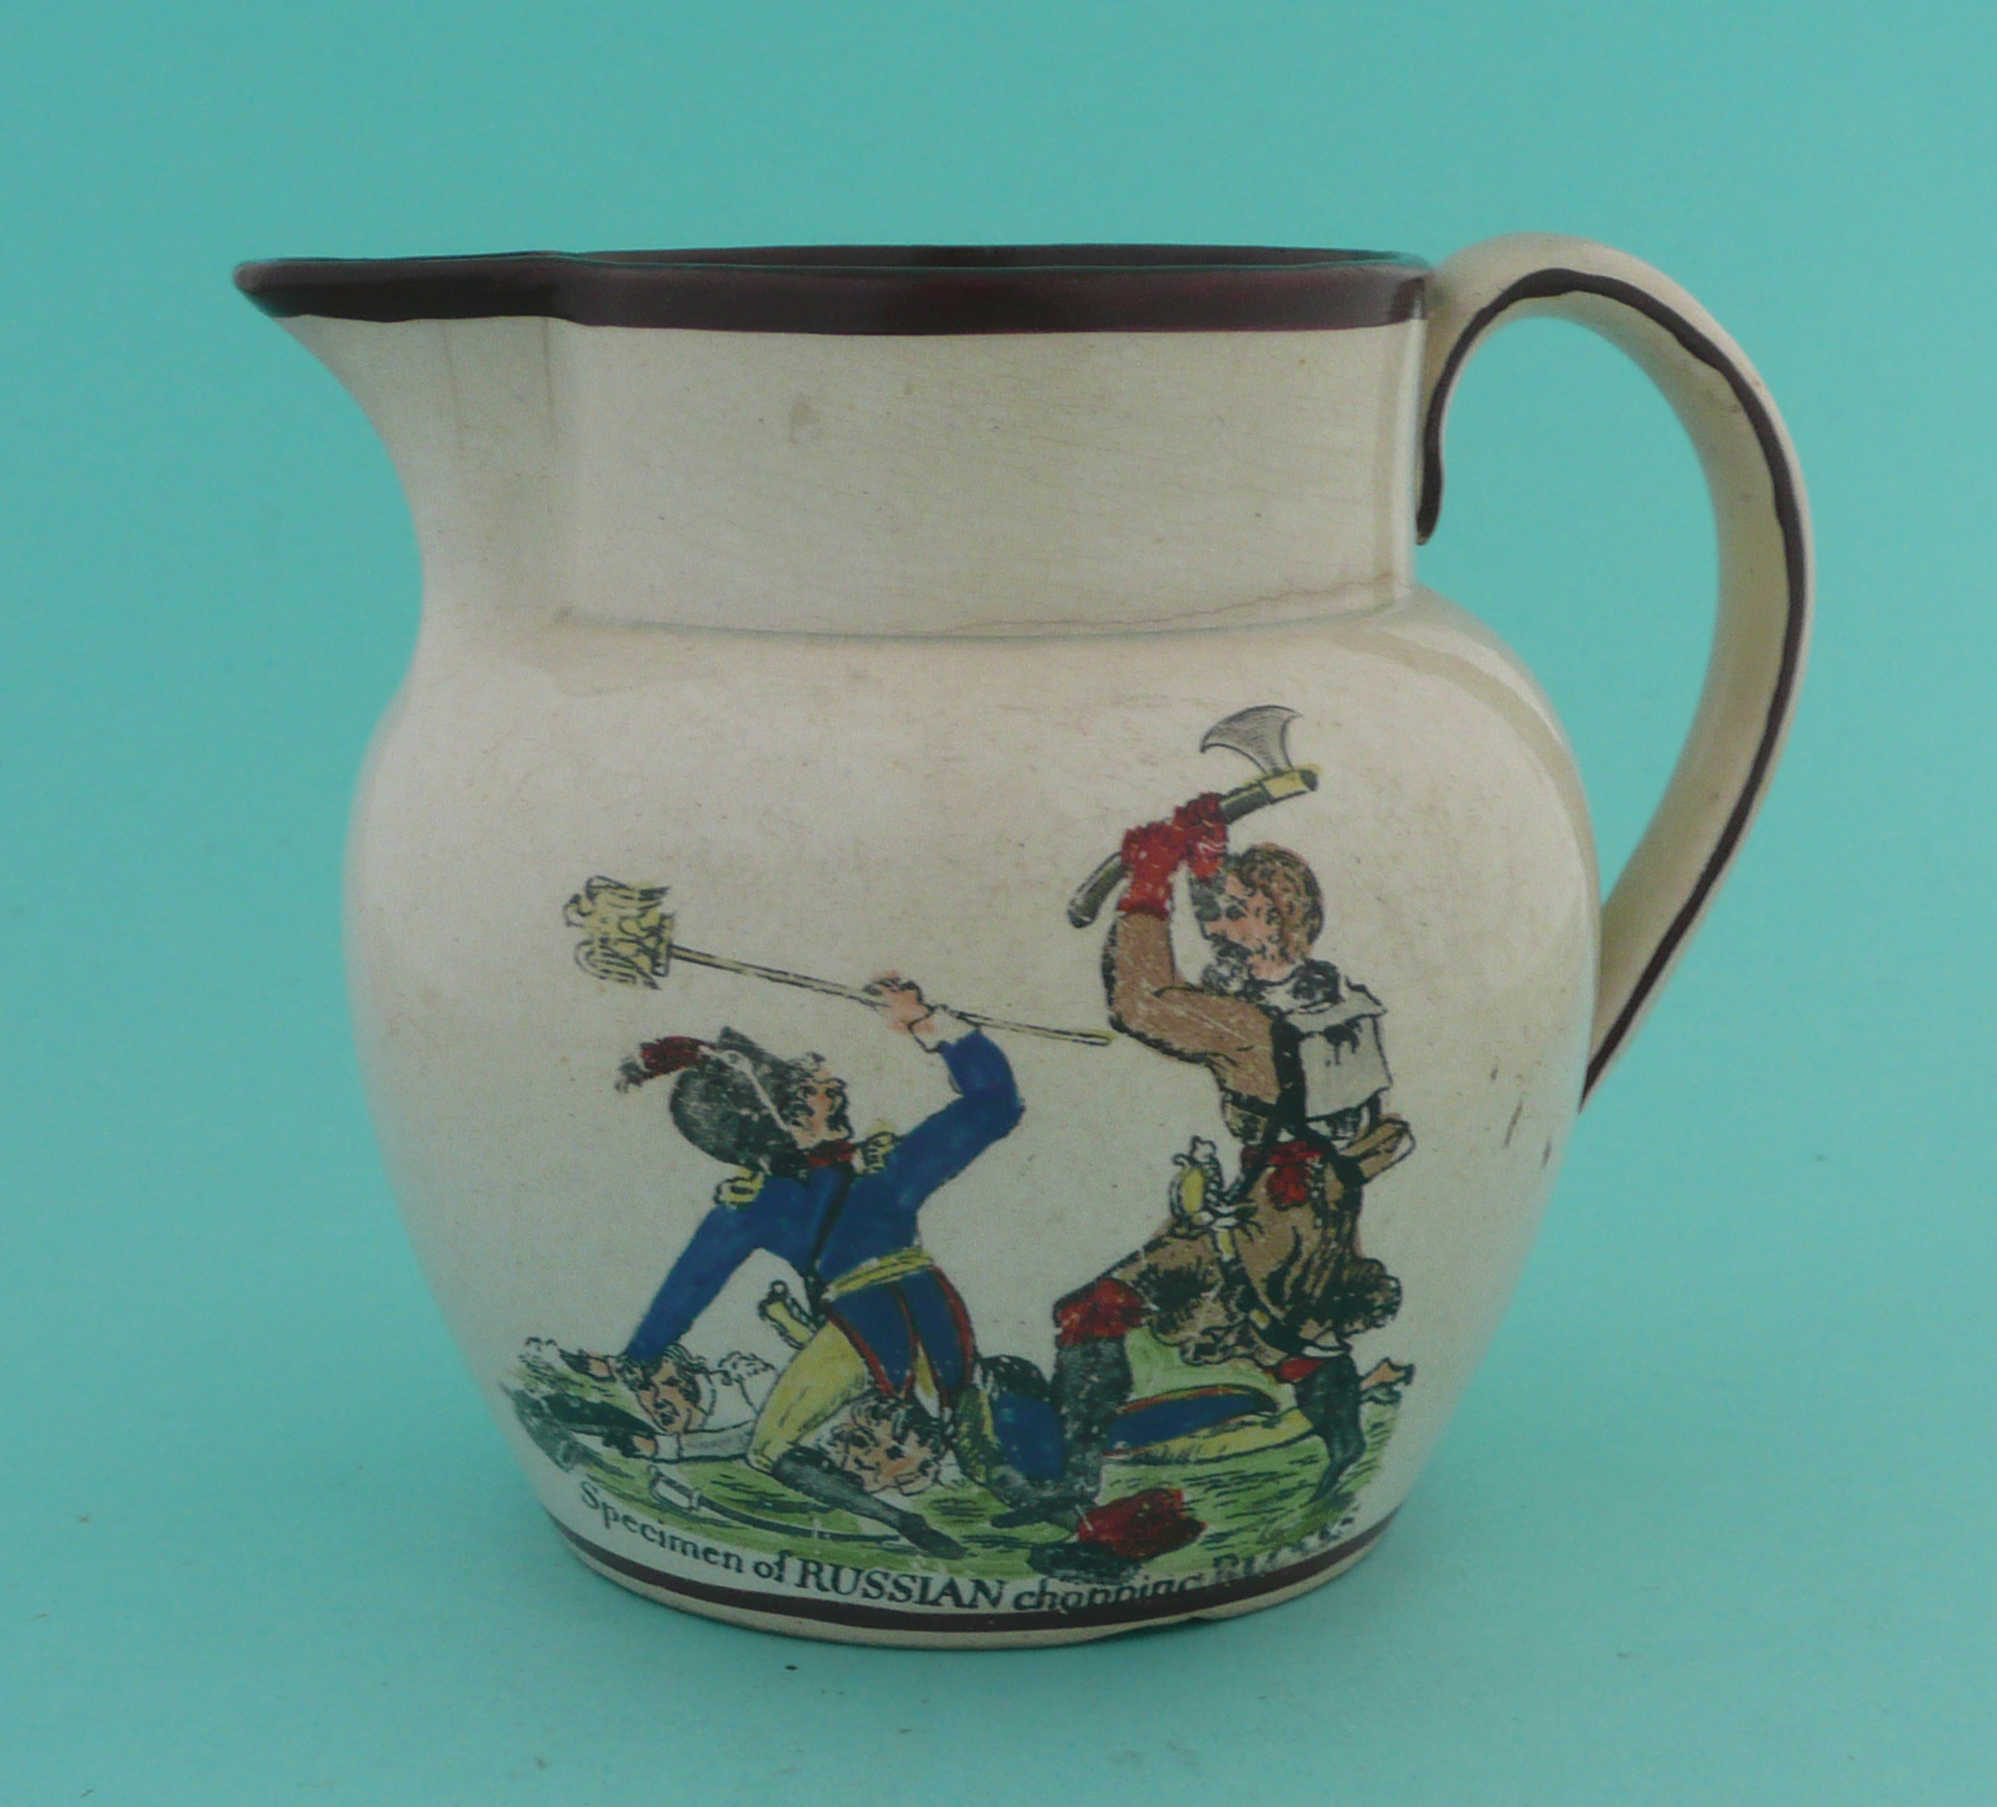 1812 Napoleon’s Russian Campaign: a colourful pearlware jug with scenes entitled ‘Specimen of